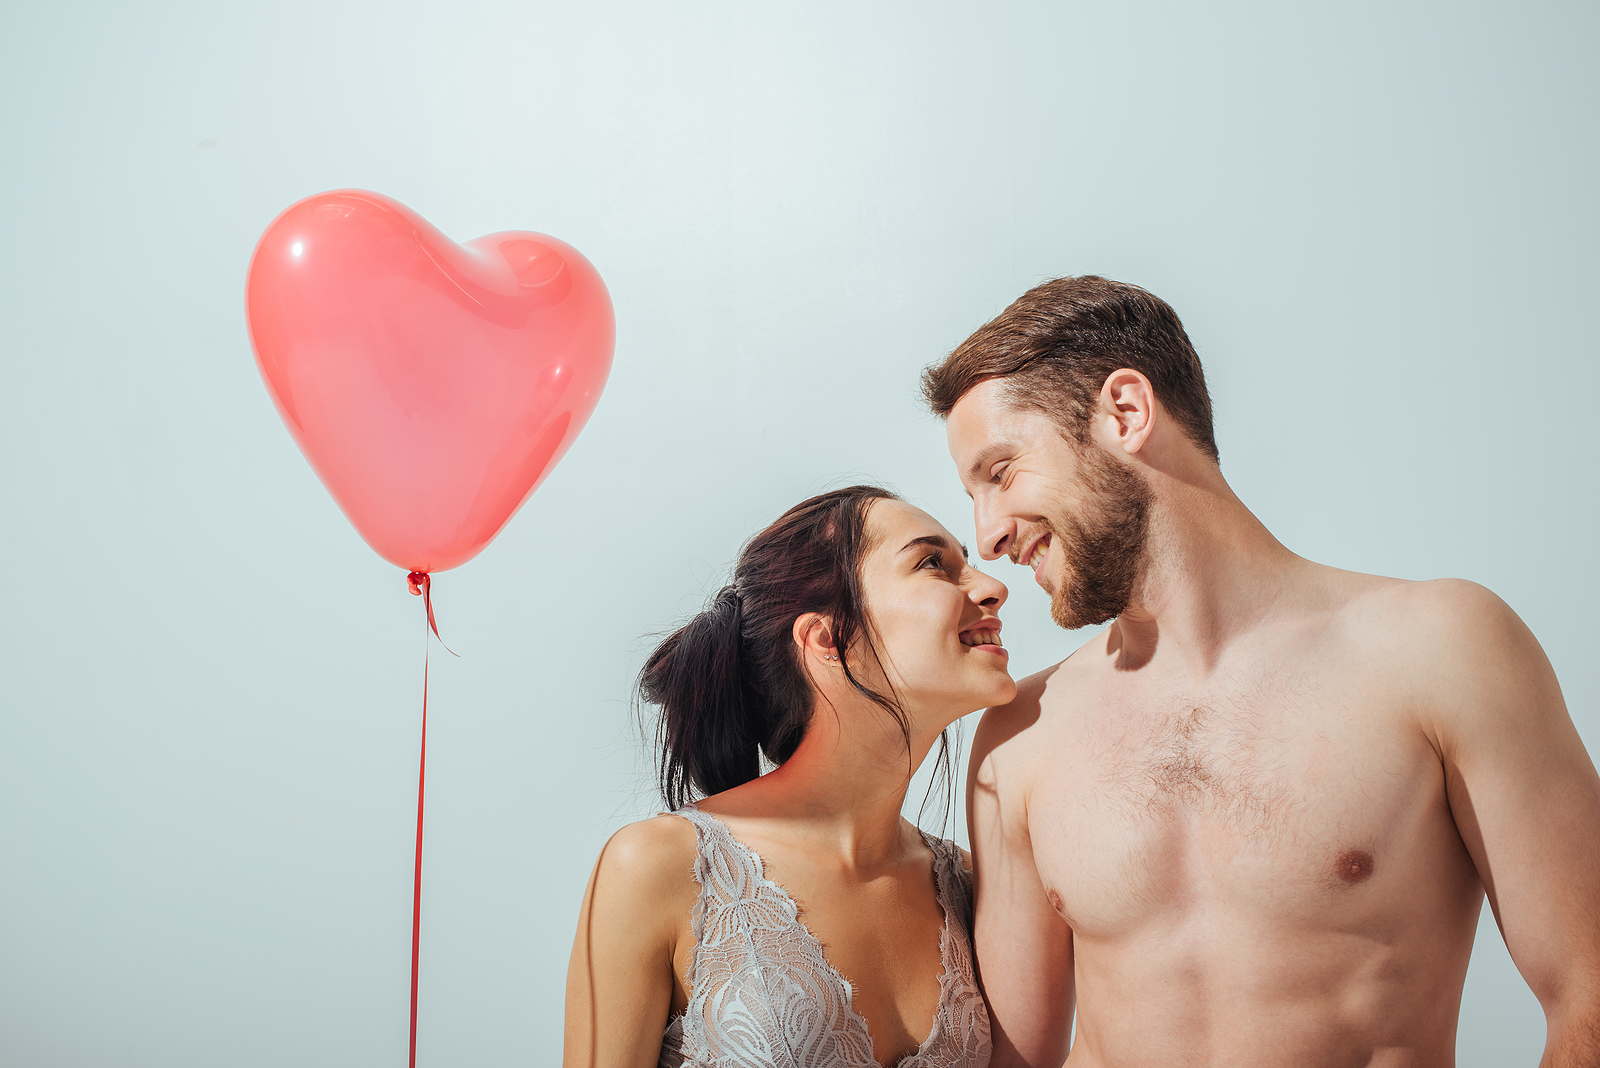 An attractive couple stands close together wearing underwear looking into eachother smiling holding a heart shaped balloon.